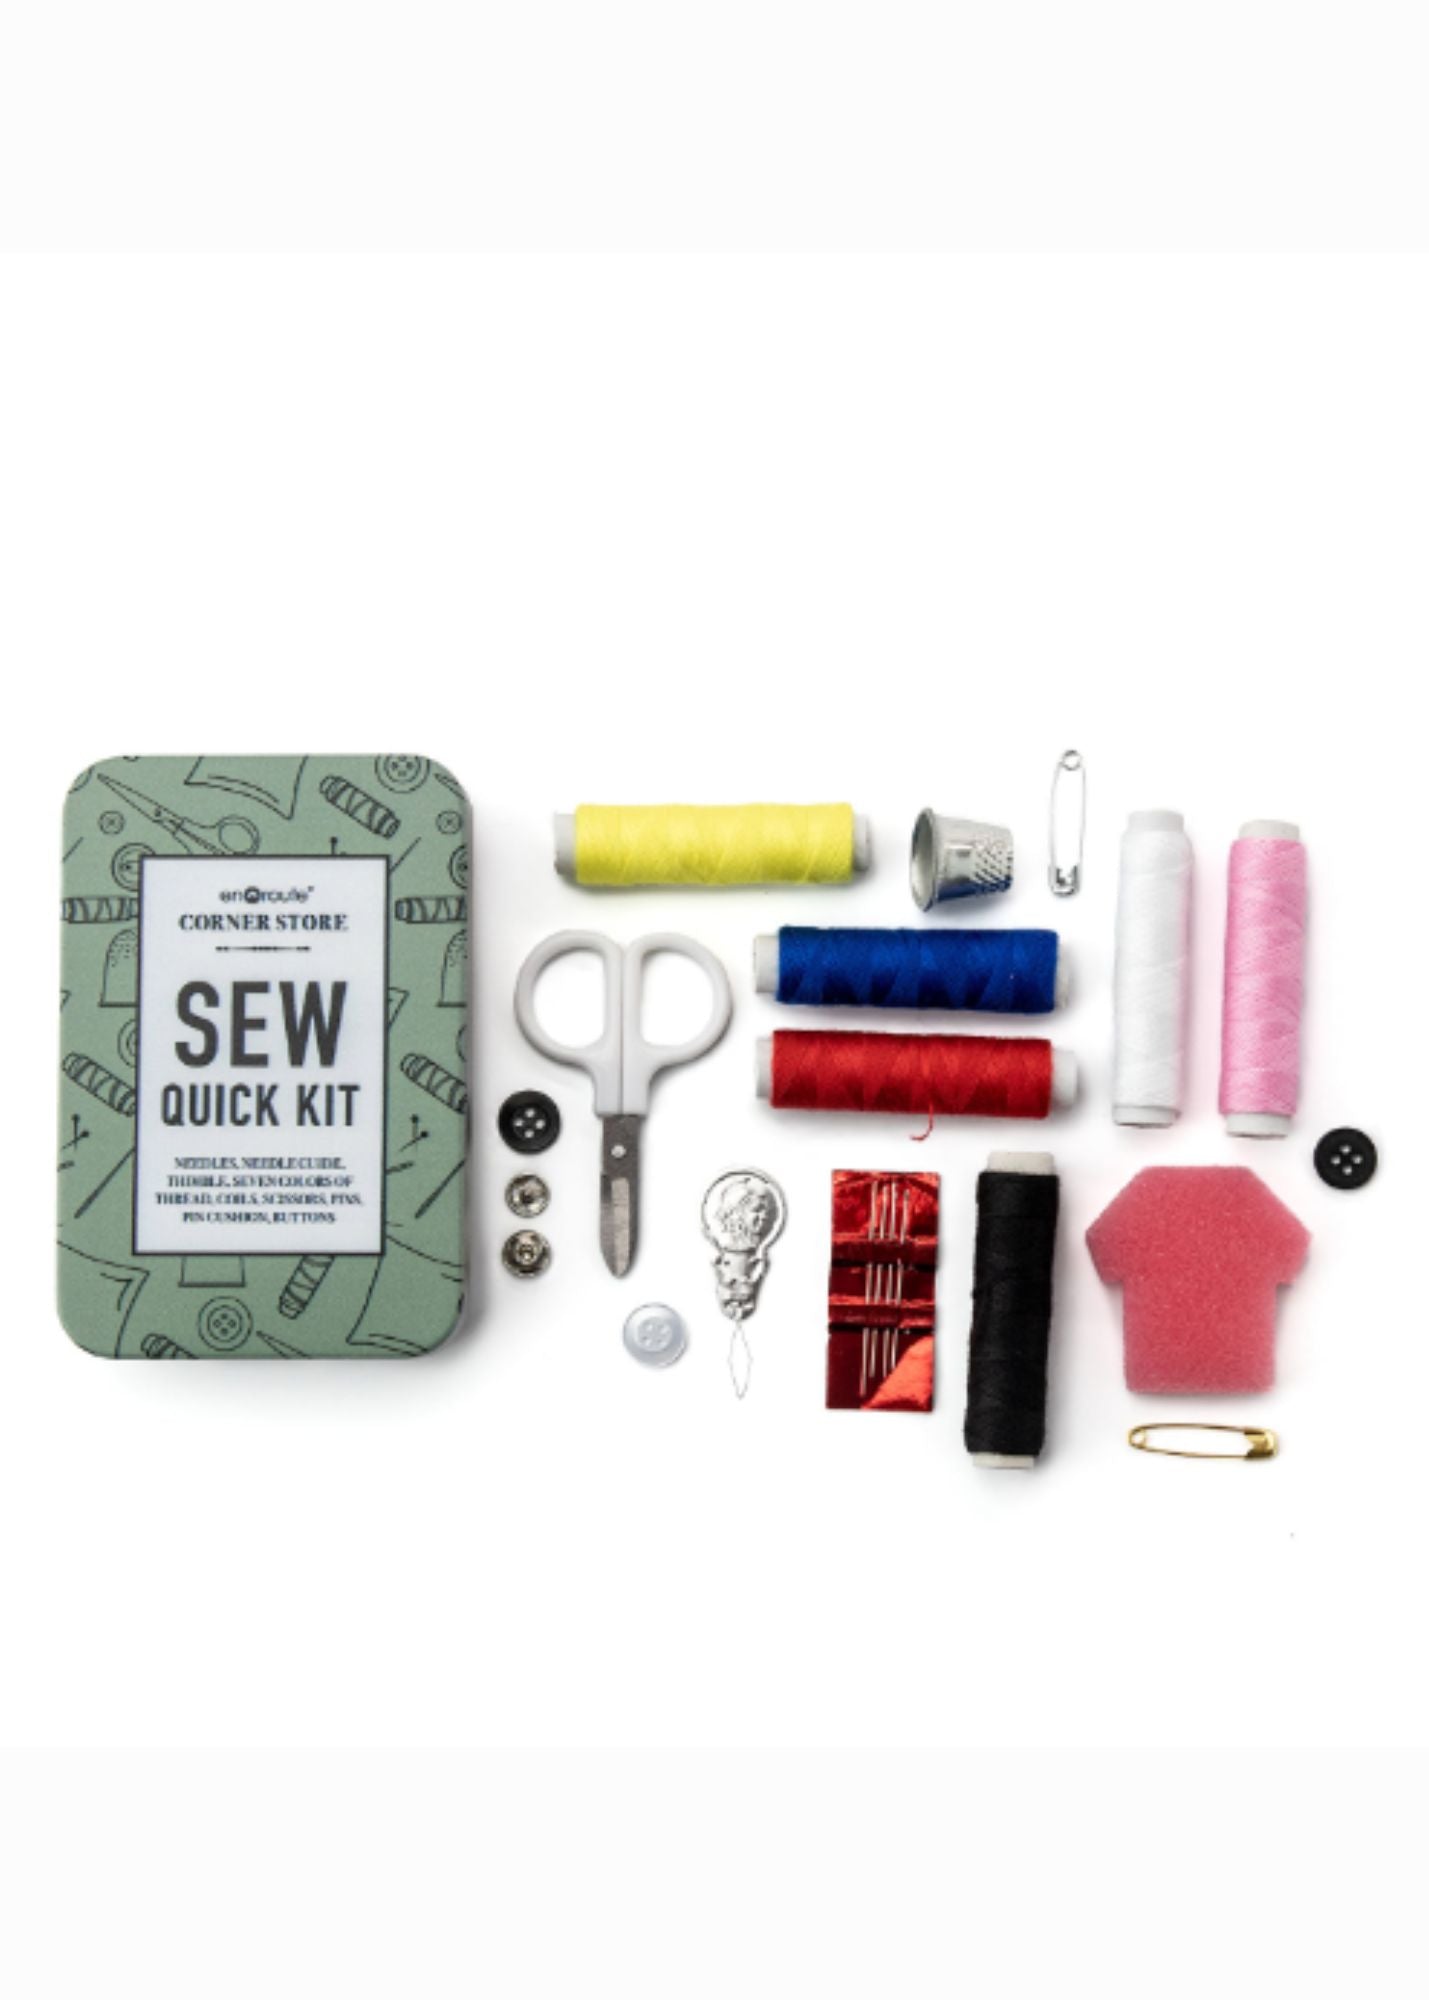 En Route Sew Quick Kit Gifts